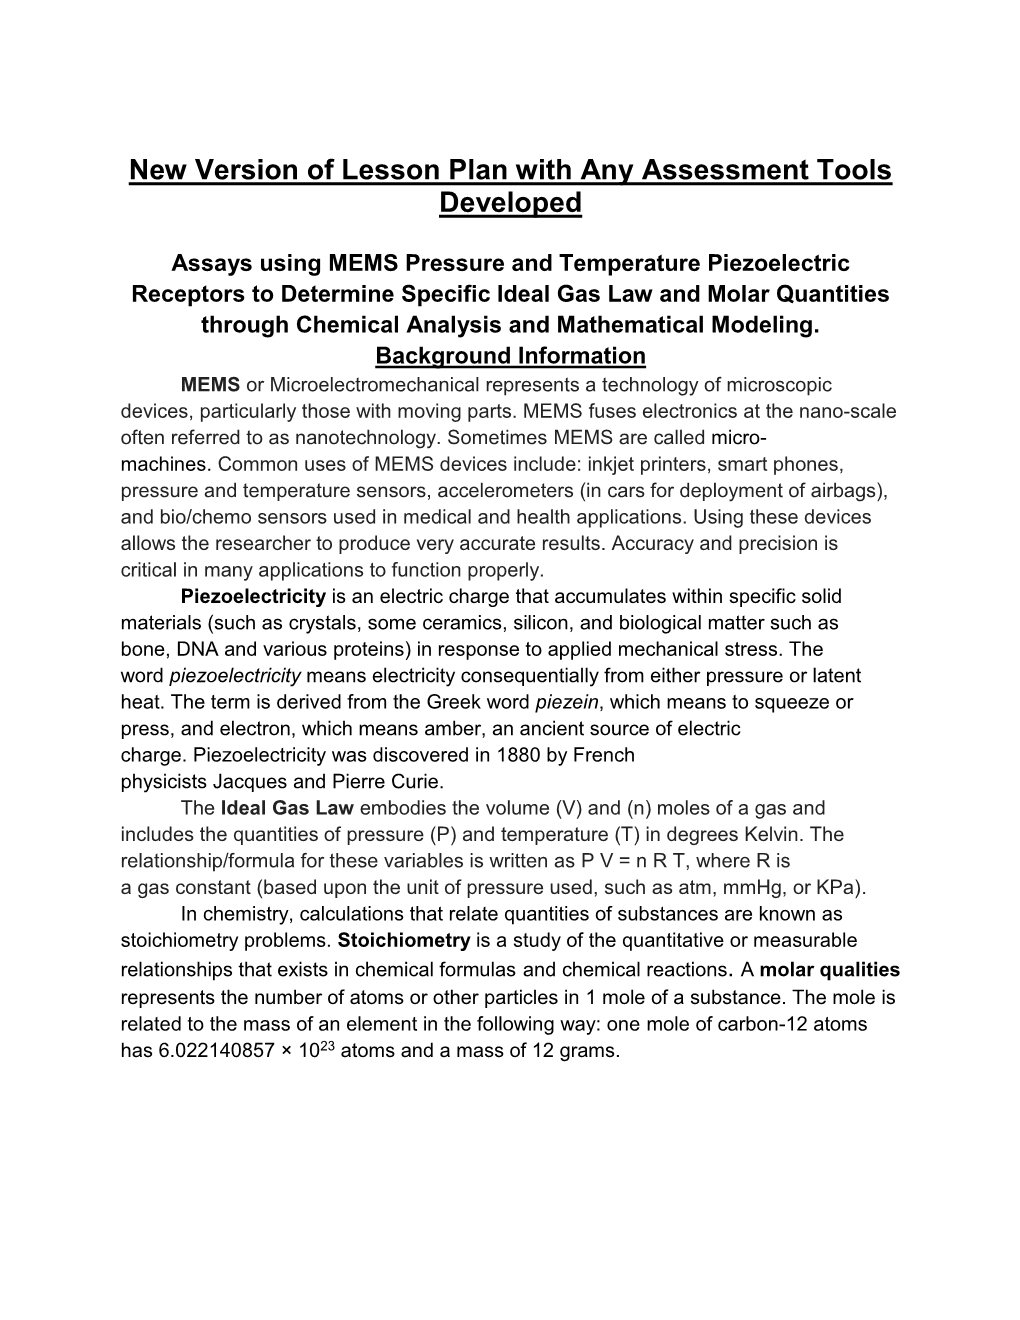 New Version of Lesson Plan with Any Assessment Tools Developed